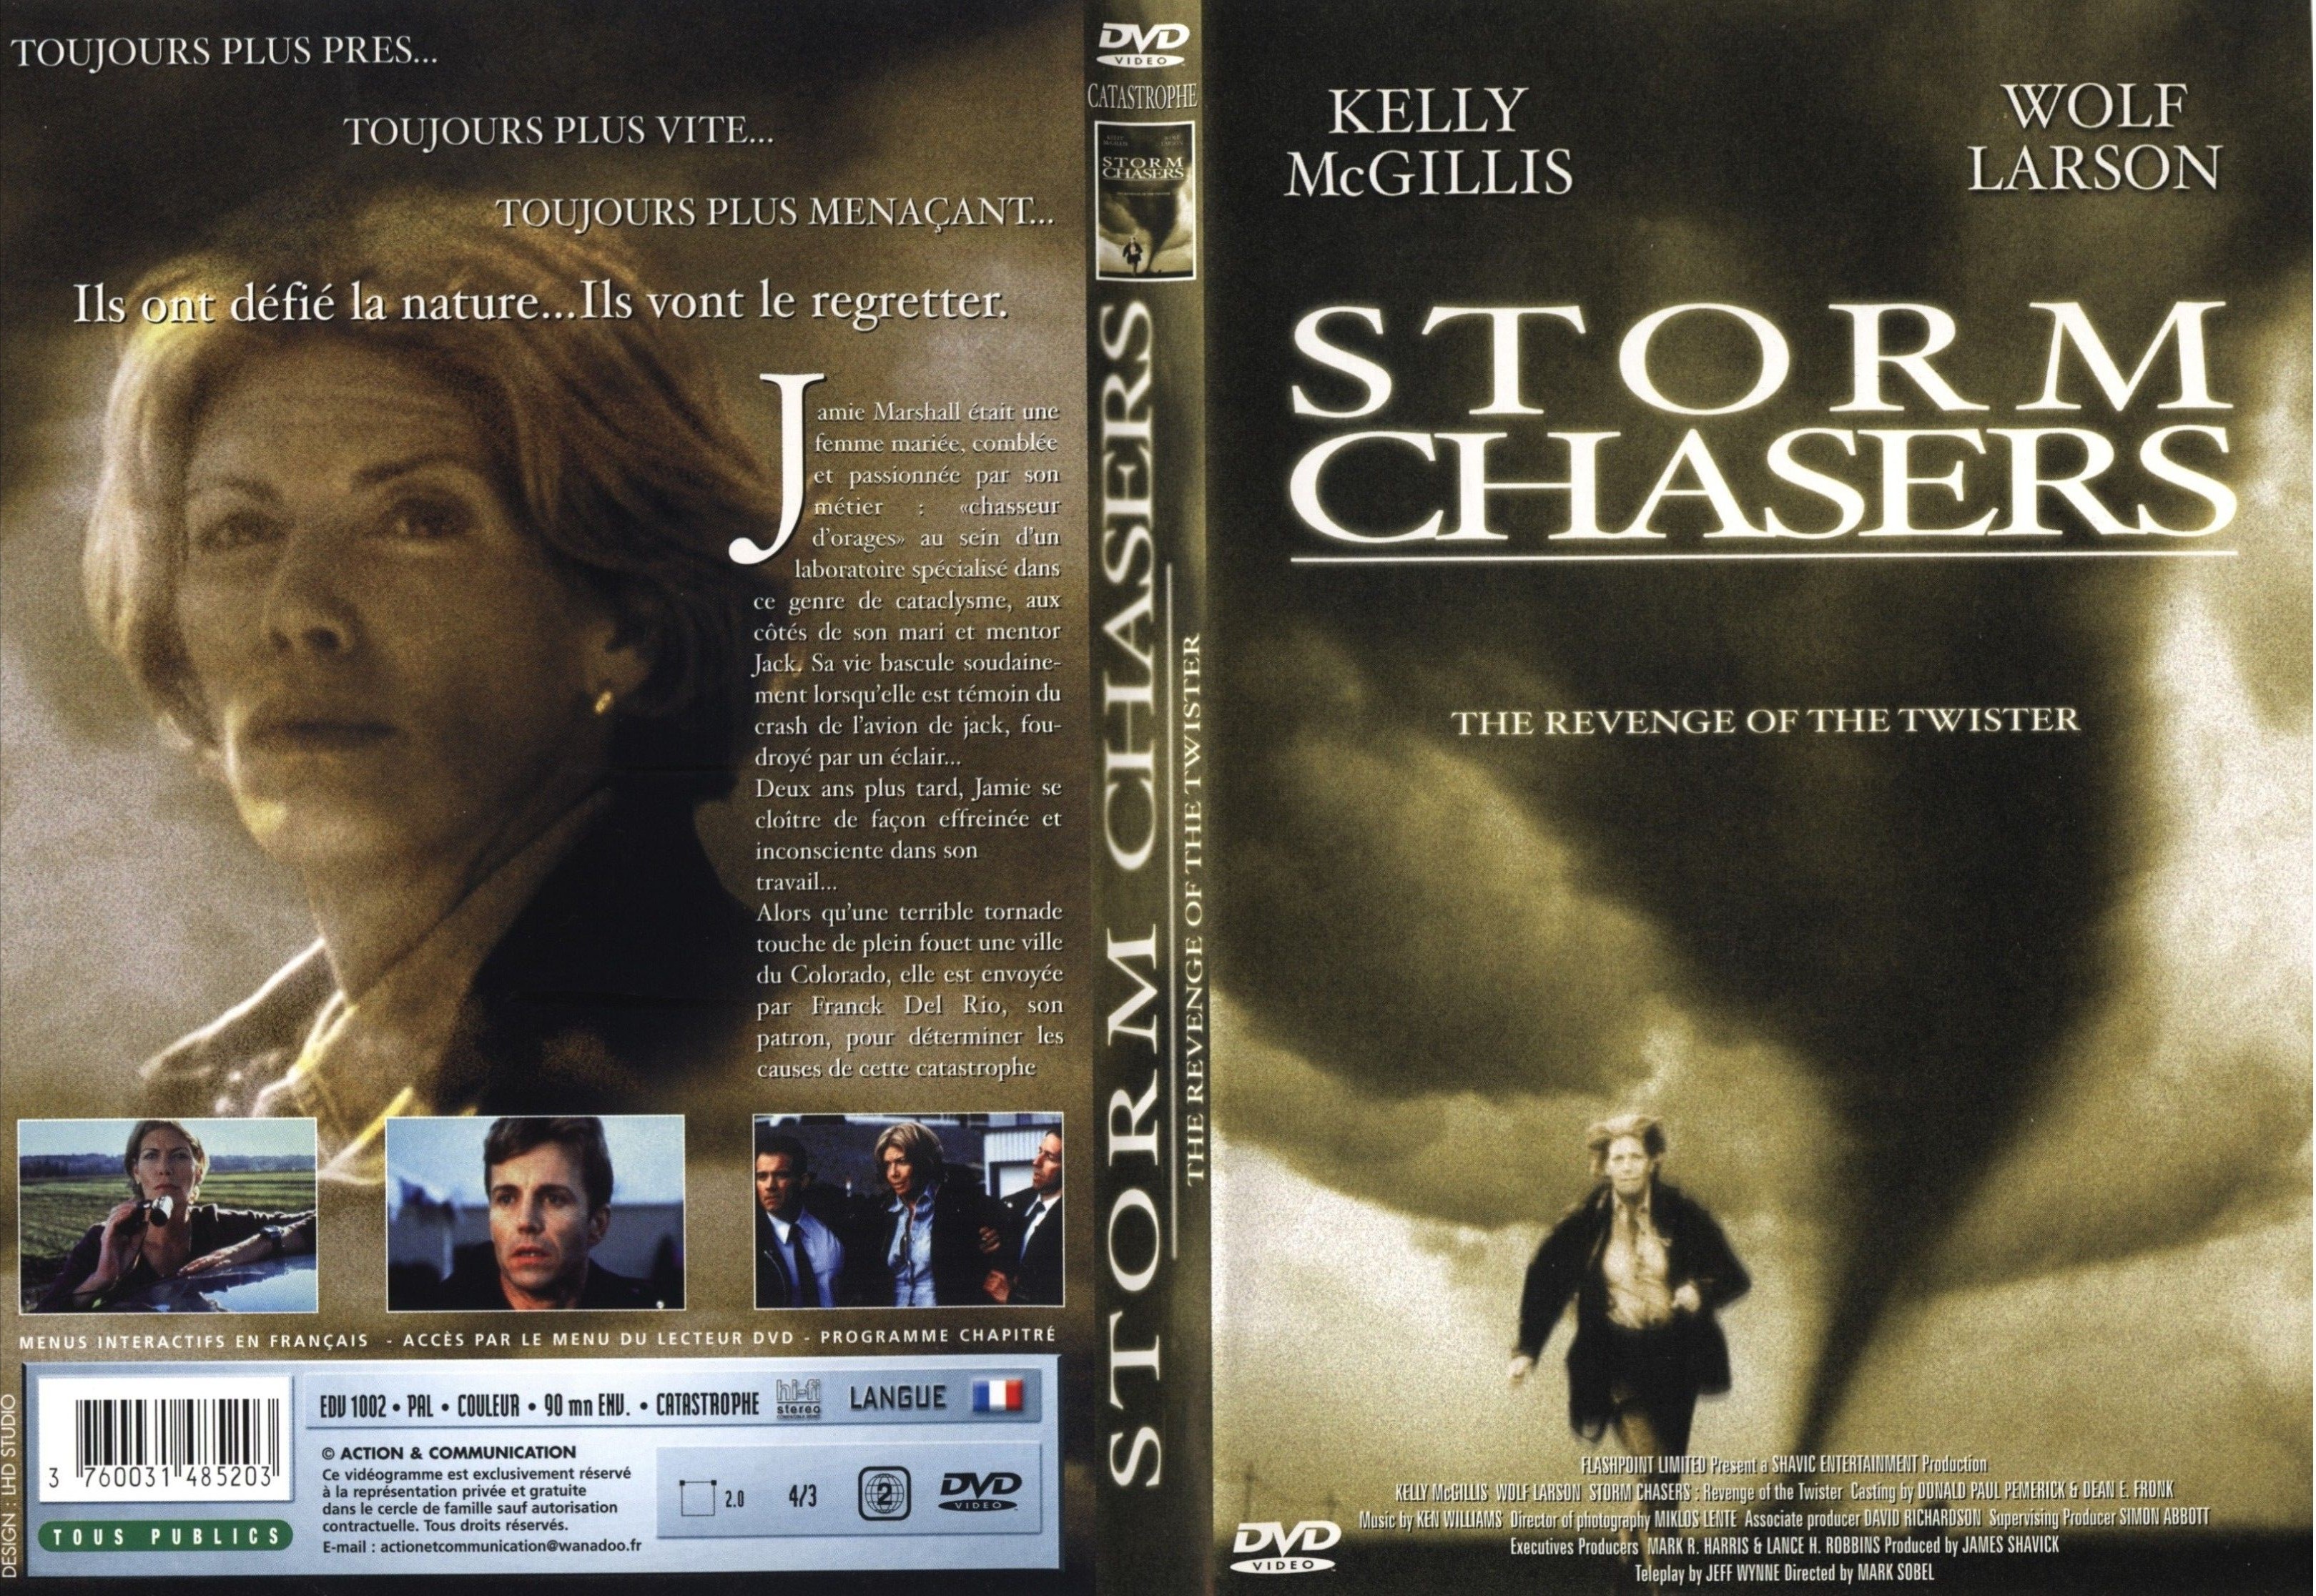 Jaquette DVD Storm chasers